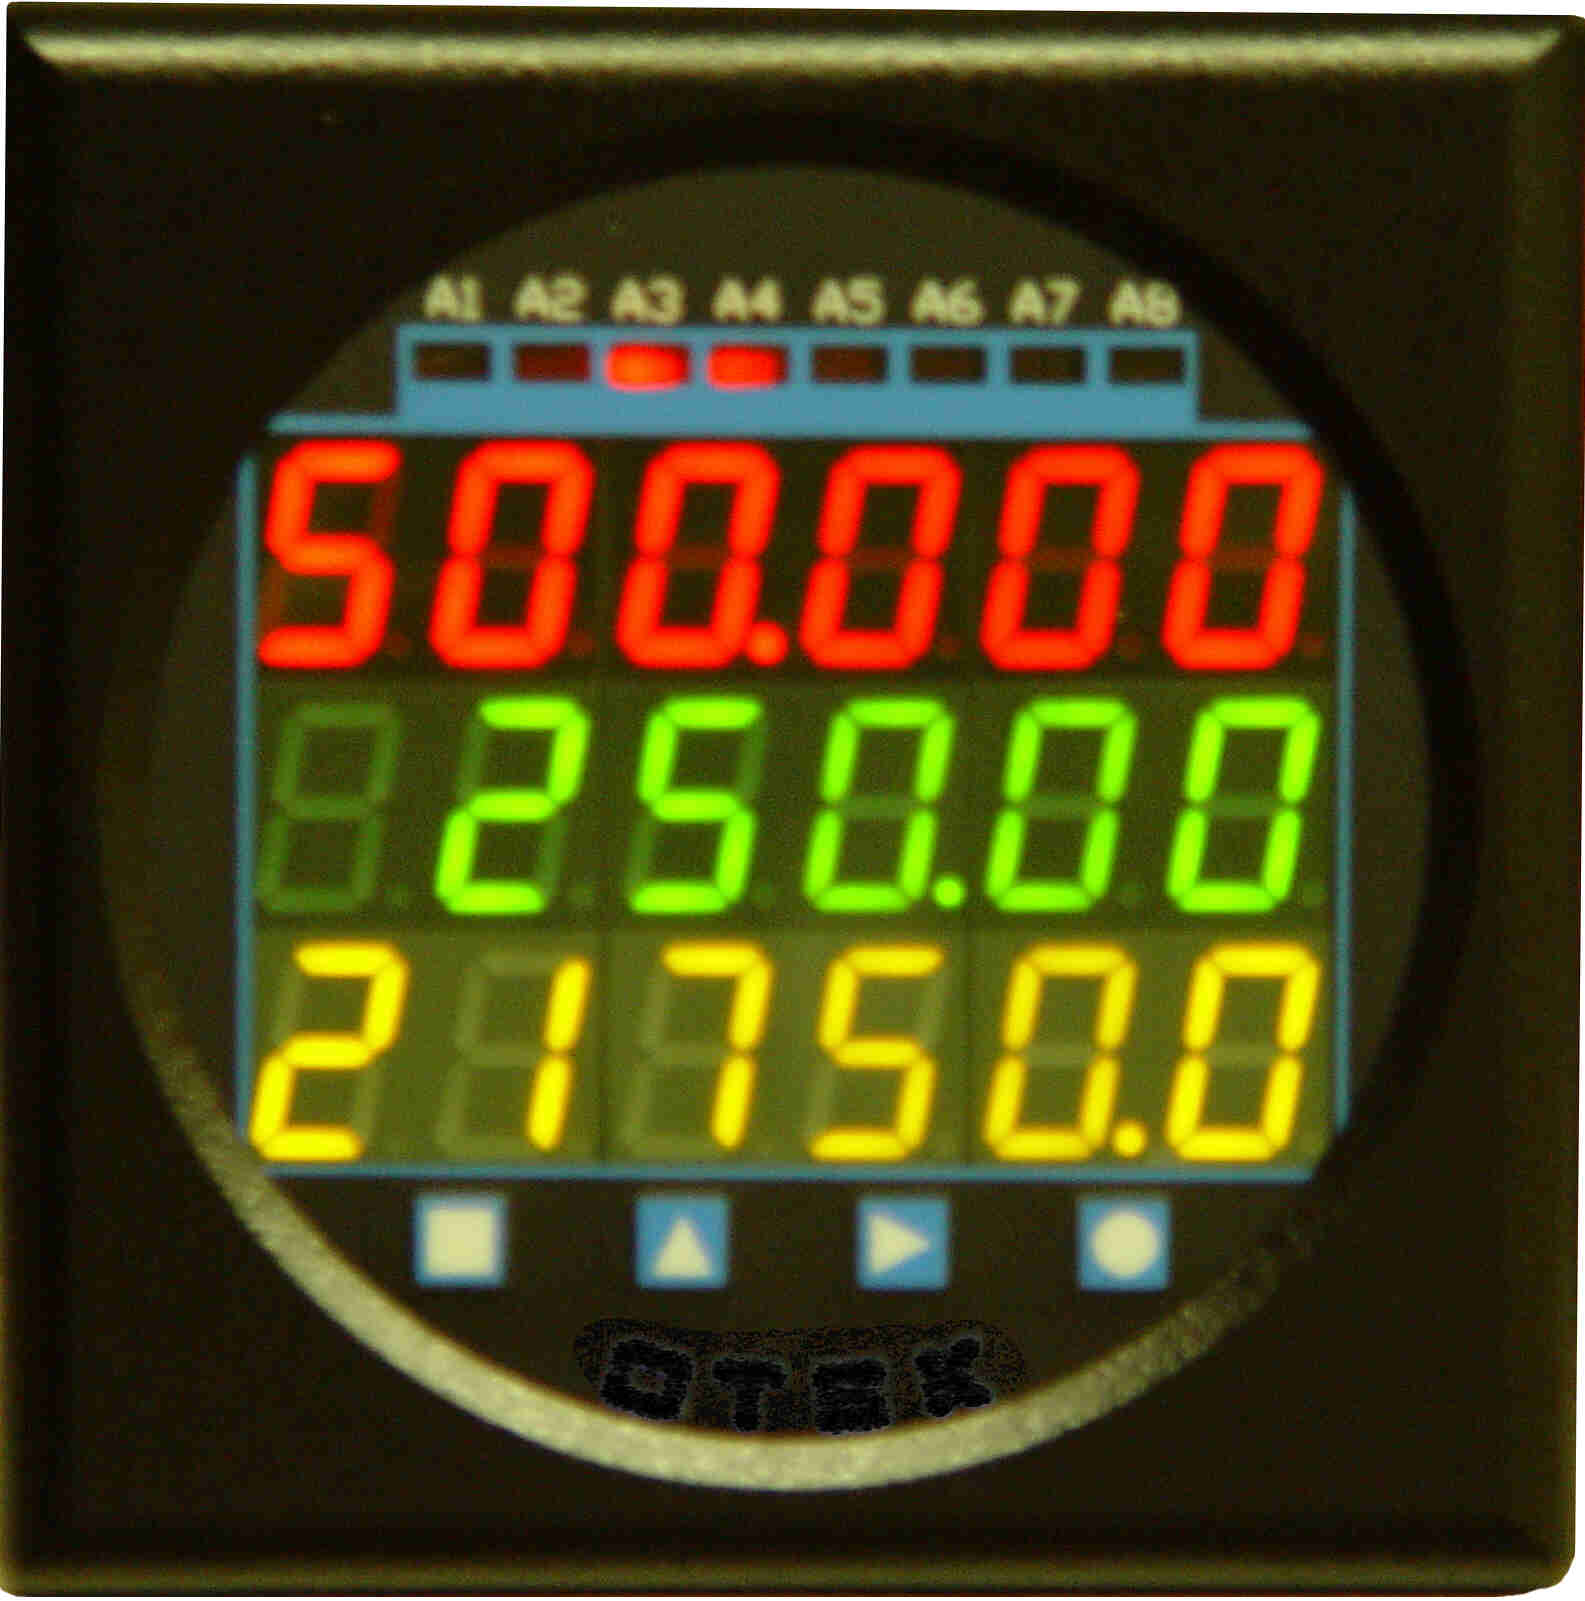 3 channel LED panel meter for serial and analog inputs